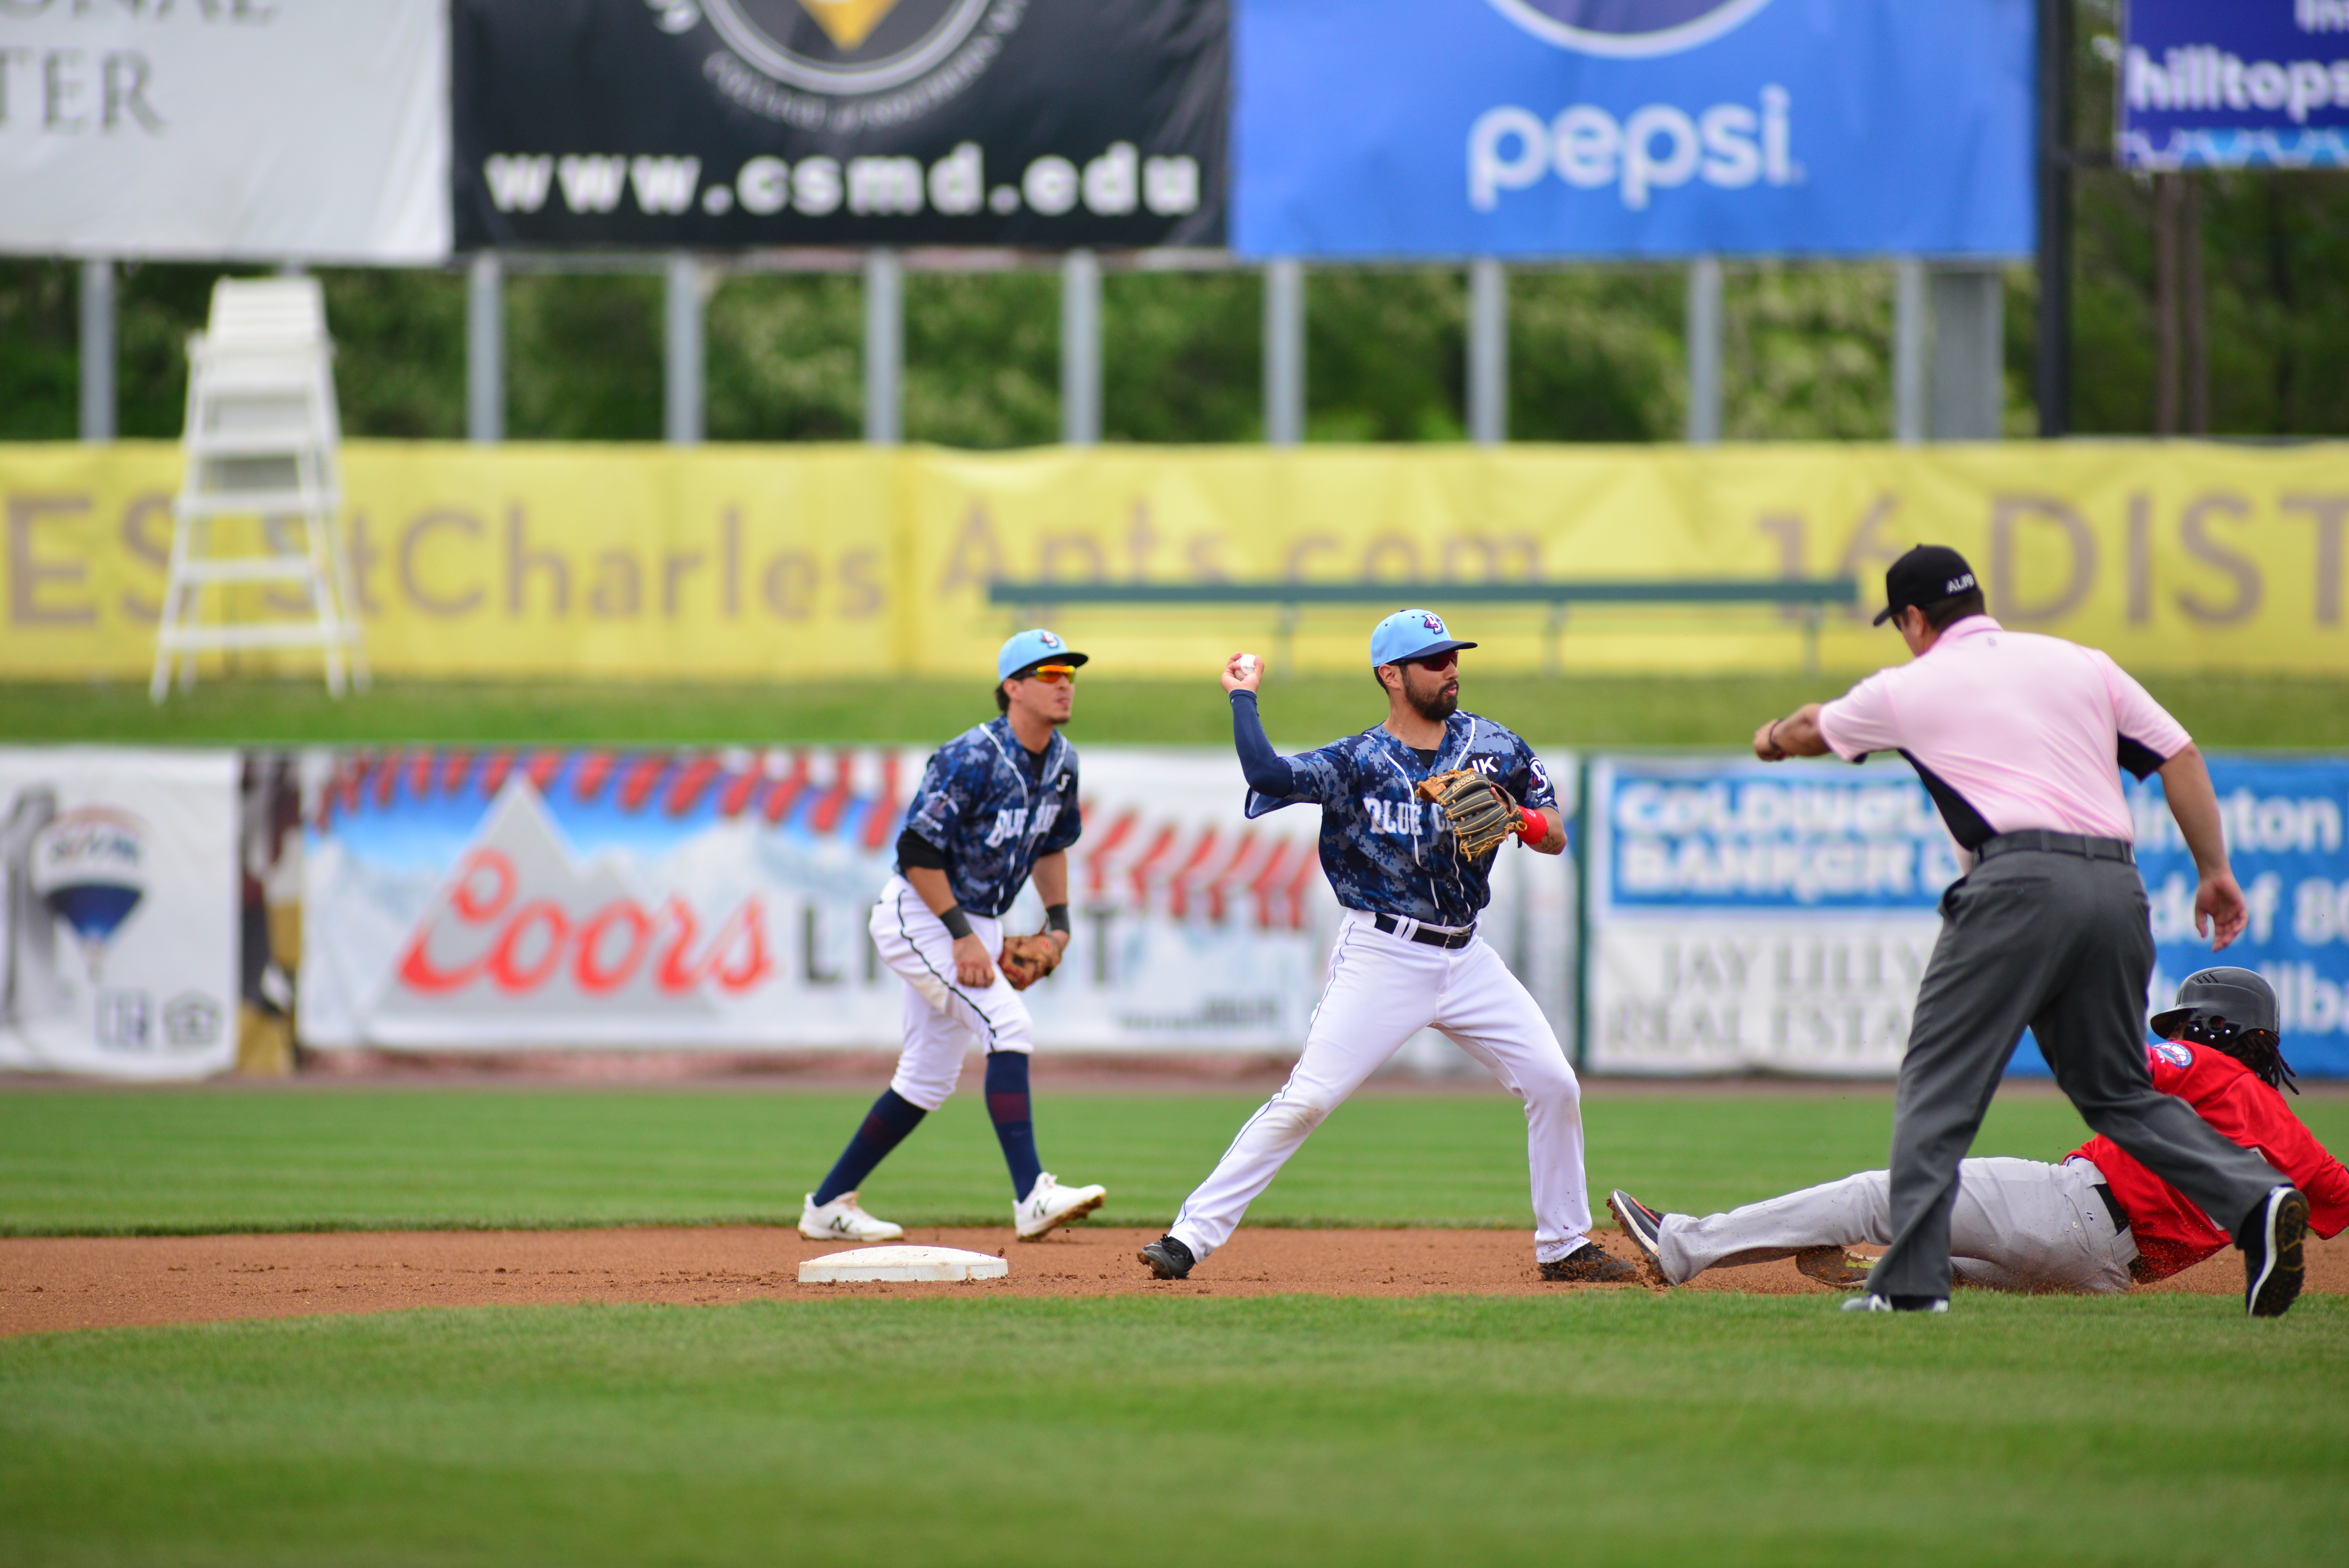 Blue Crabs Celebrate Mother's Day with walk-off Win!